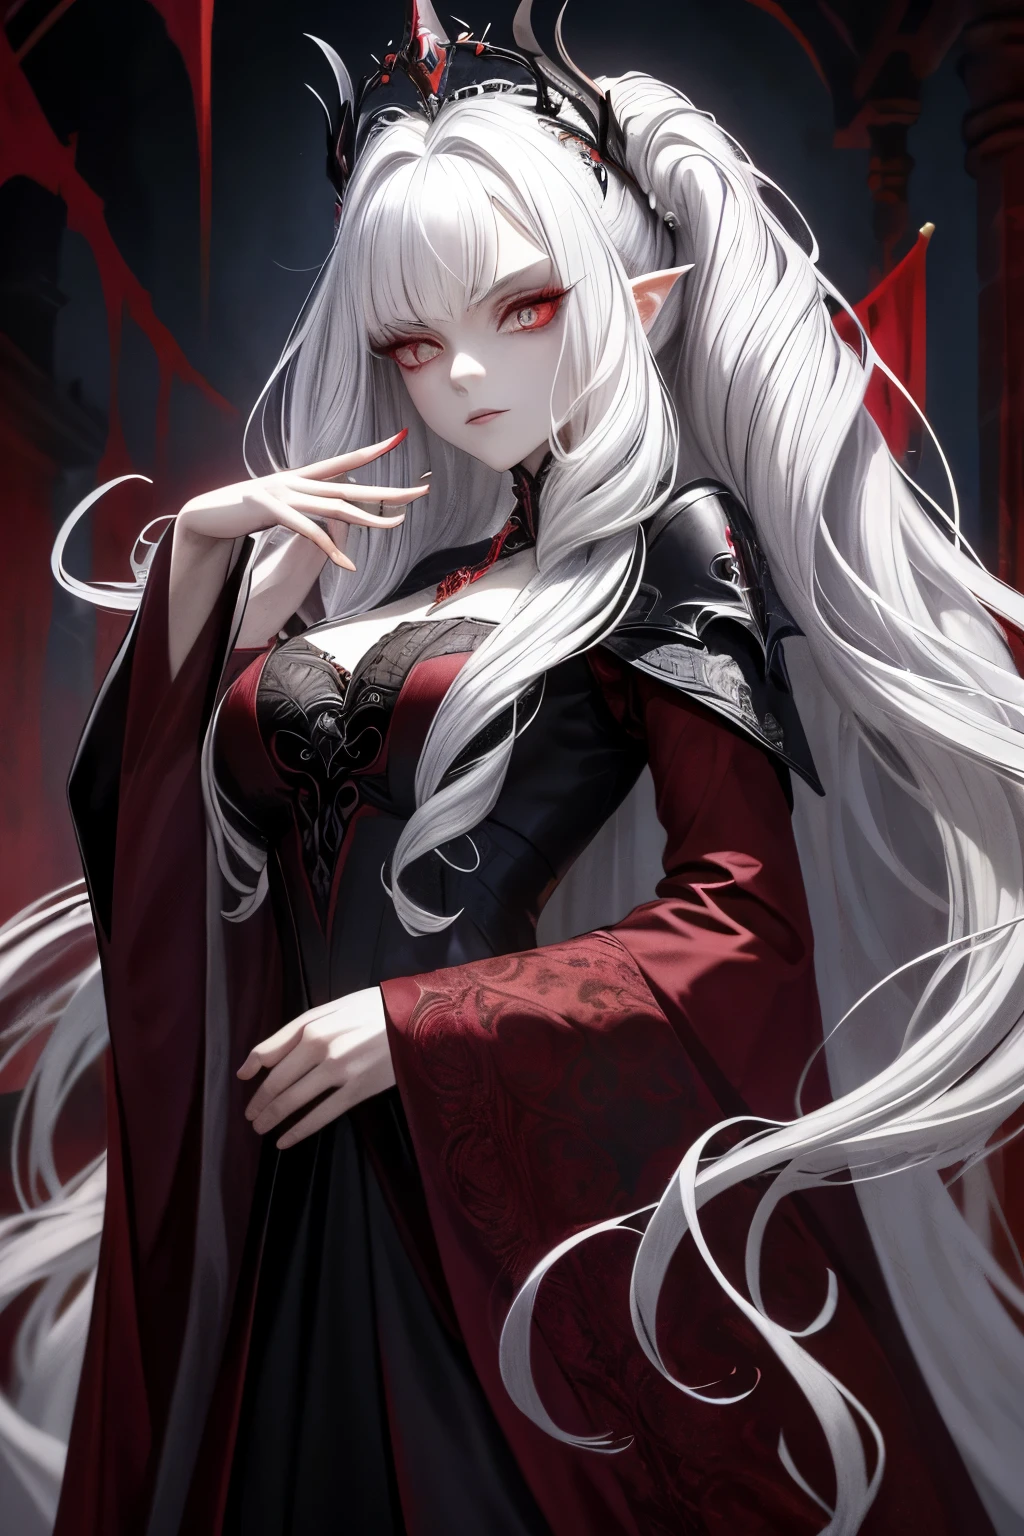 (masterpiece, best quality), 1 vampire queen, dark robe, intricate patterns, white hair, soft curls, red eyes, eerie power, regal look, elegance, vampiric fear, realistic, captivating, 

The vampire queen dons a regal, dark robe adorned with intricate patterns, representing her ancient lineage and sovereign status. Her long white hair cascades down her back in soft curls, framing her refined features. Her crimson eyes glow with an eerie power, emanating a sense of mystery and allure. Her regal appearance is a captivating juxtaposition of elegance and vampir